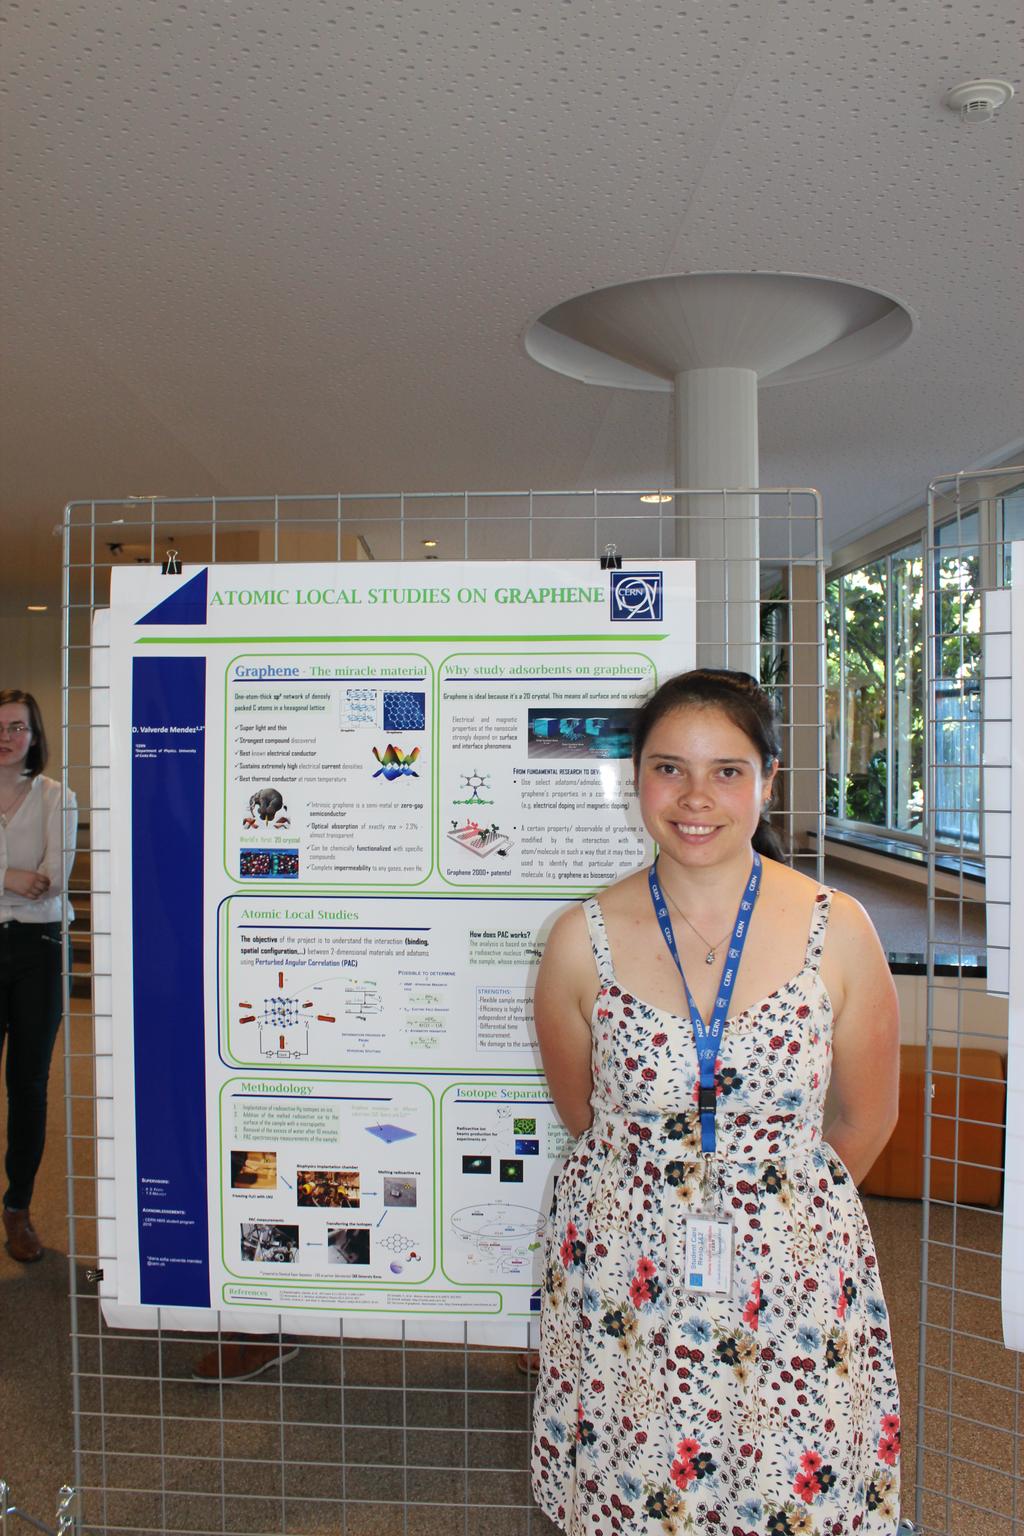 Non Member State Summer Student Program at ISOLDE 3 SAFETY AND OTHER CONTRIBUTIONS. Figure 4: Poster on Atomic Local Studies on Graphene presented at summer student session.